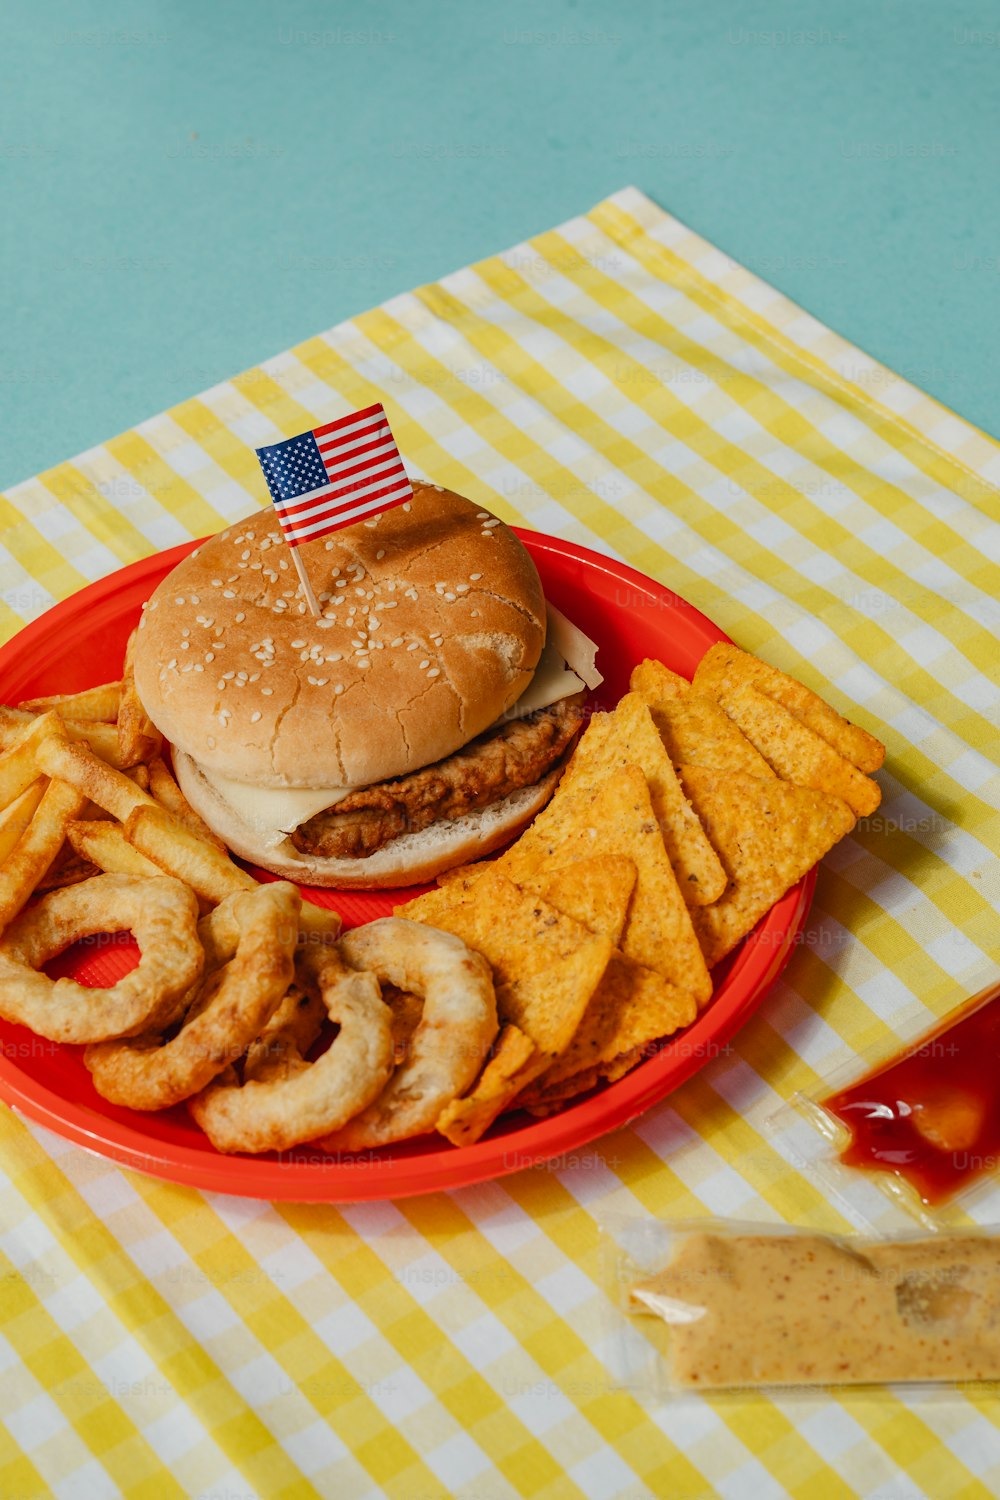 a plate with a hamburger, onion rings, and french fries